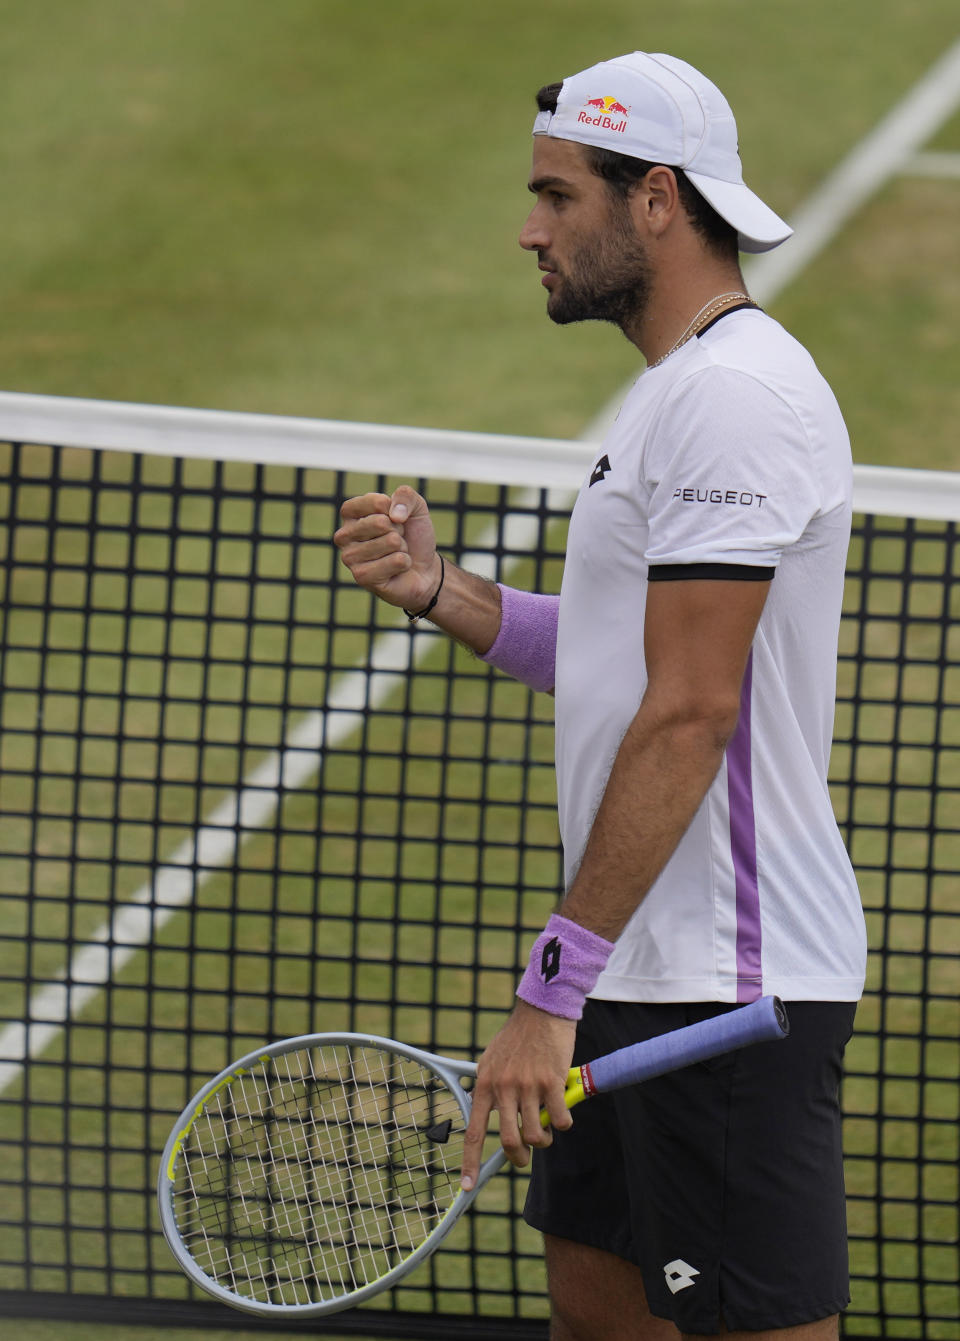 Matteo Berrettini of Italy celebrates winning at match point against Andy Murray of Britain during their singles tennis match at the Queen's Club tournament in London, Thursday, June 17, 2021. (AP Photo/Kirsty Wigglesworth)